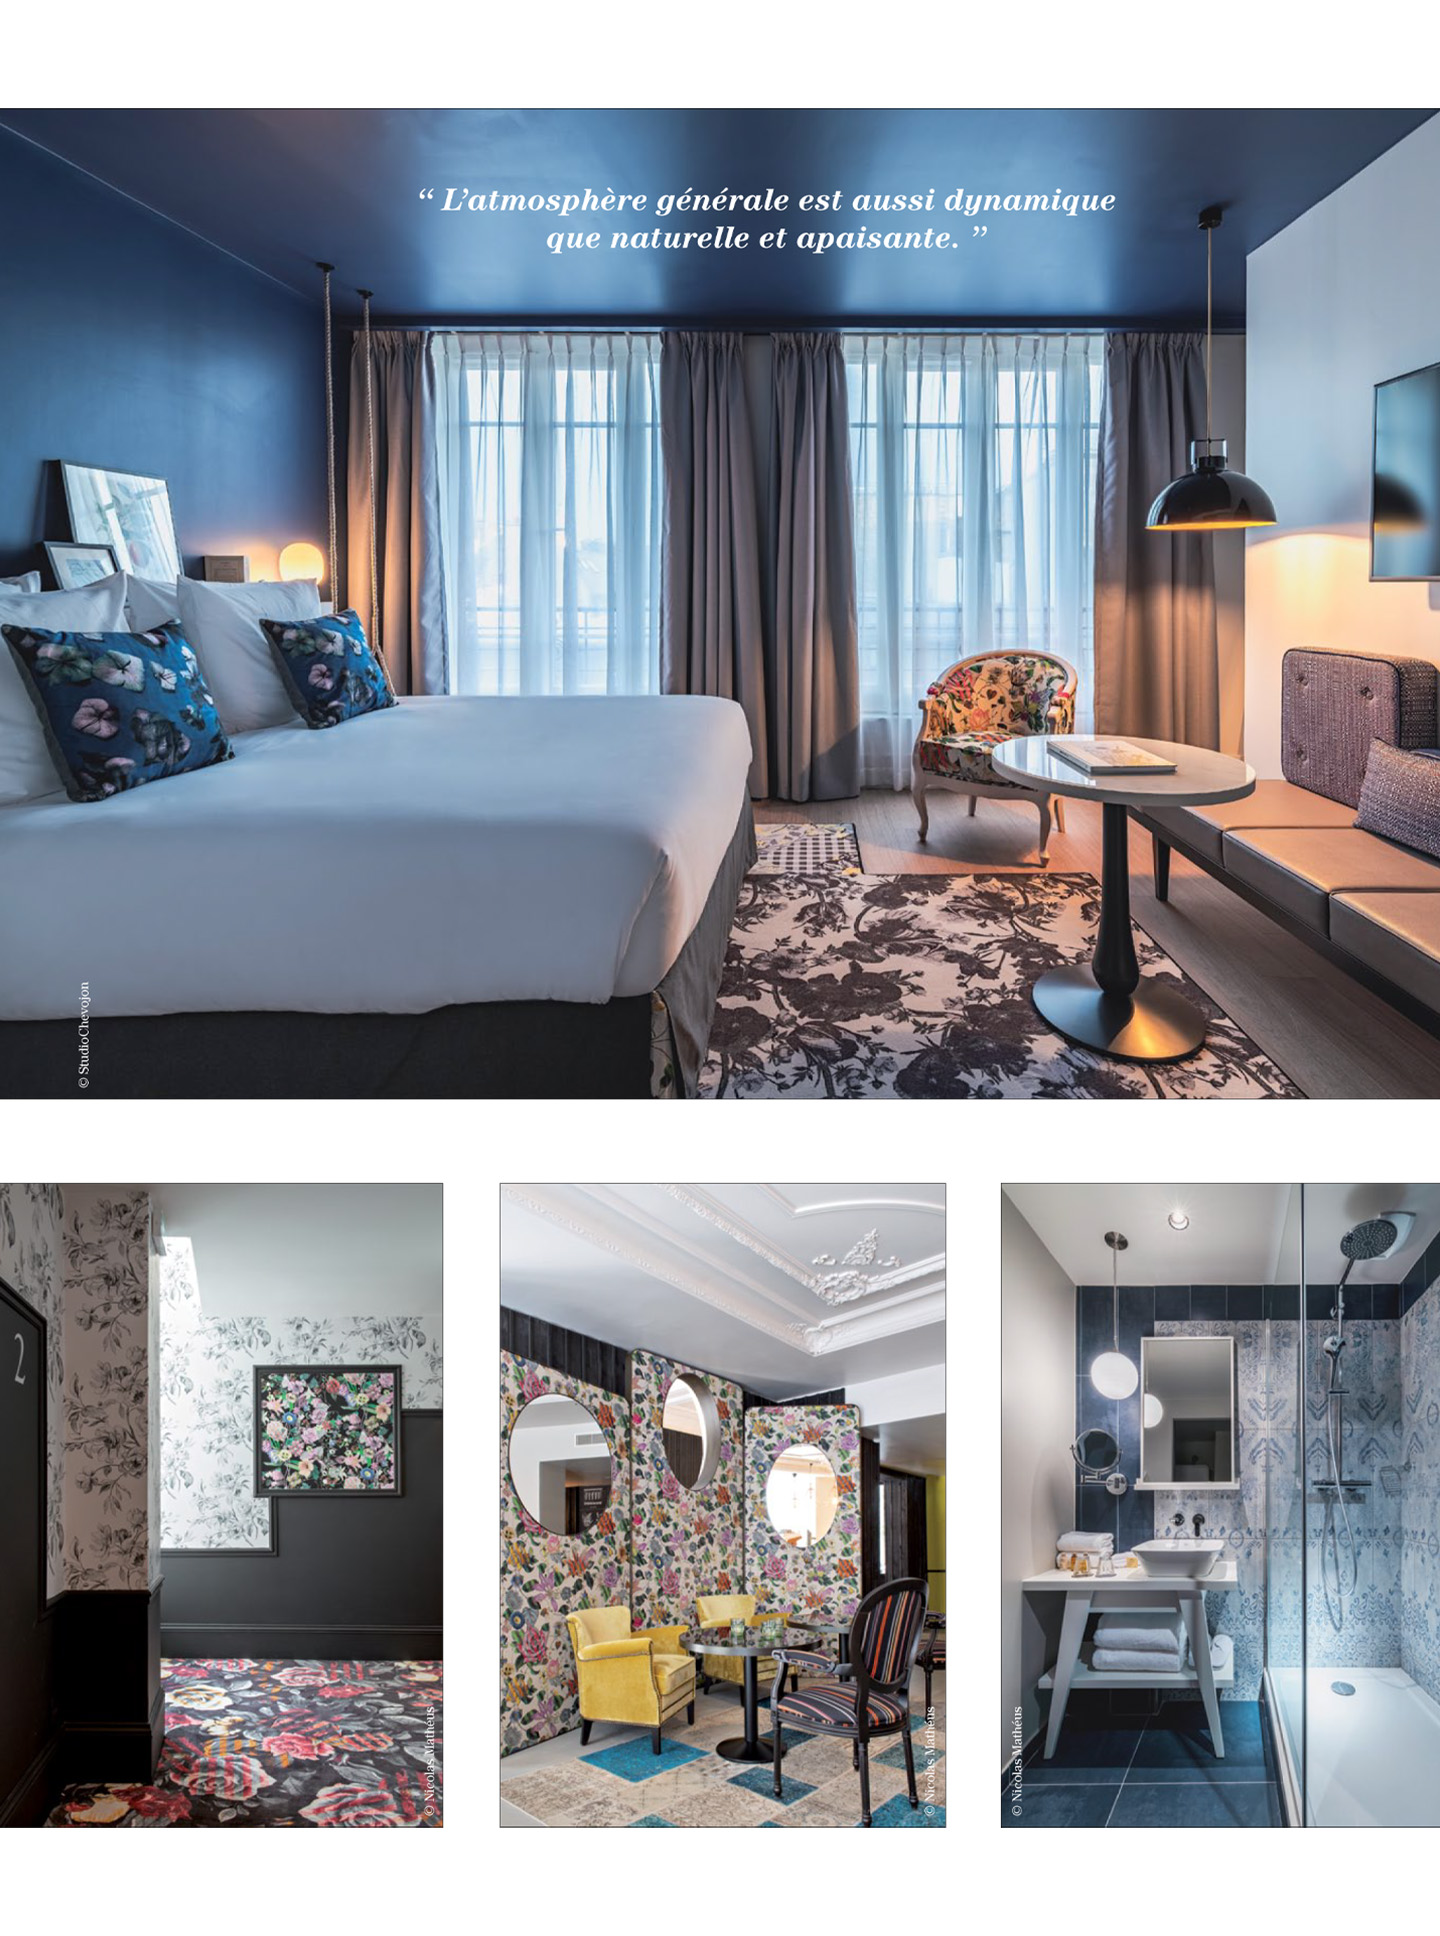 article on the belleval paris by the interior design studio jean-philippe nuel in artravel magazine, lifestyle hotel with a botanical and floral decoration